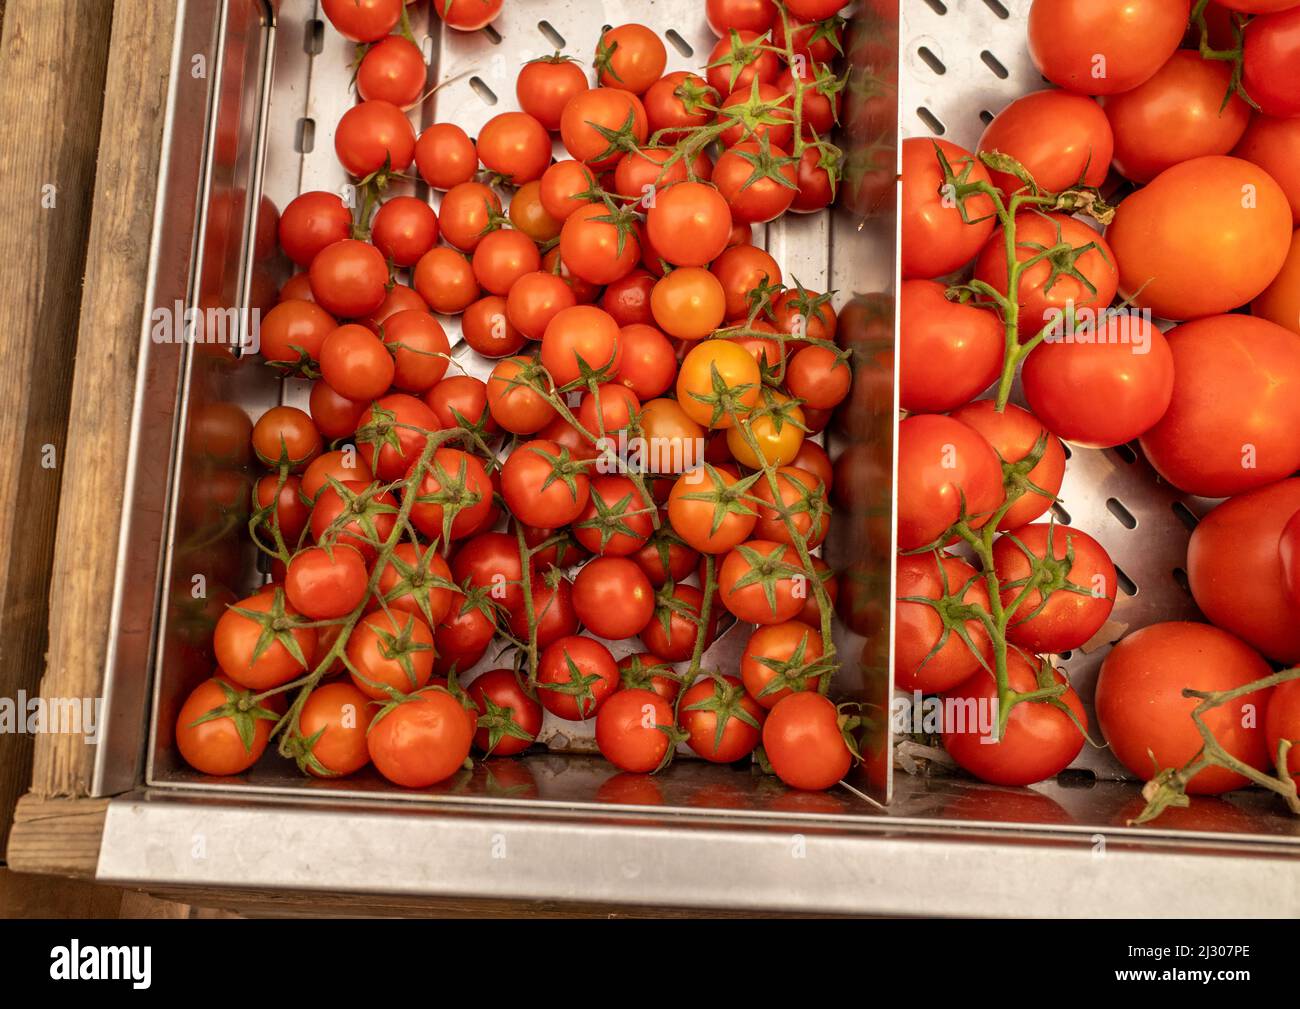 Large and small red vine tomatos displayed side by side in boxes at a grocery store. Stock Photo